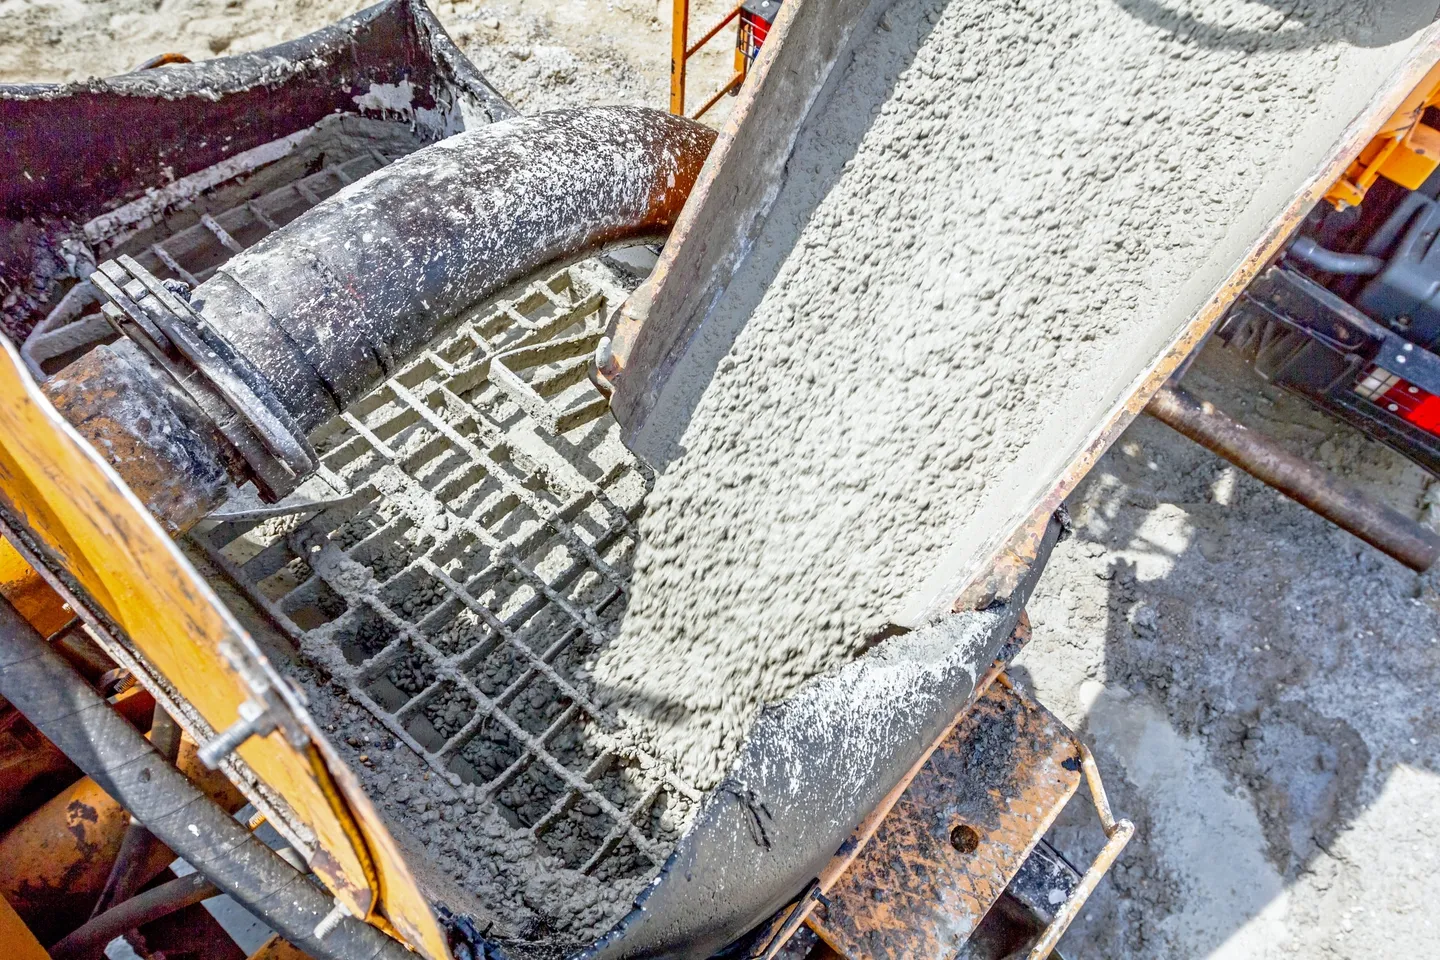 A cement mixer is being used to mix concrete.